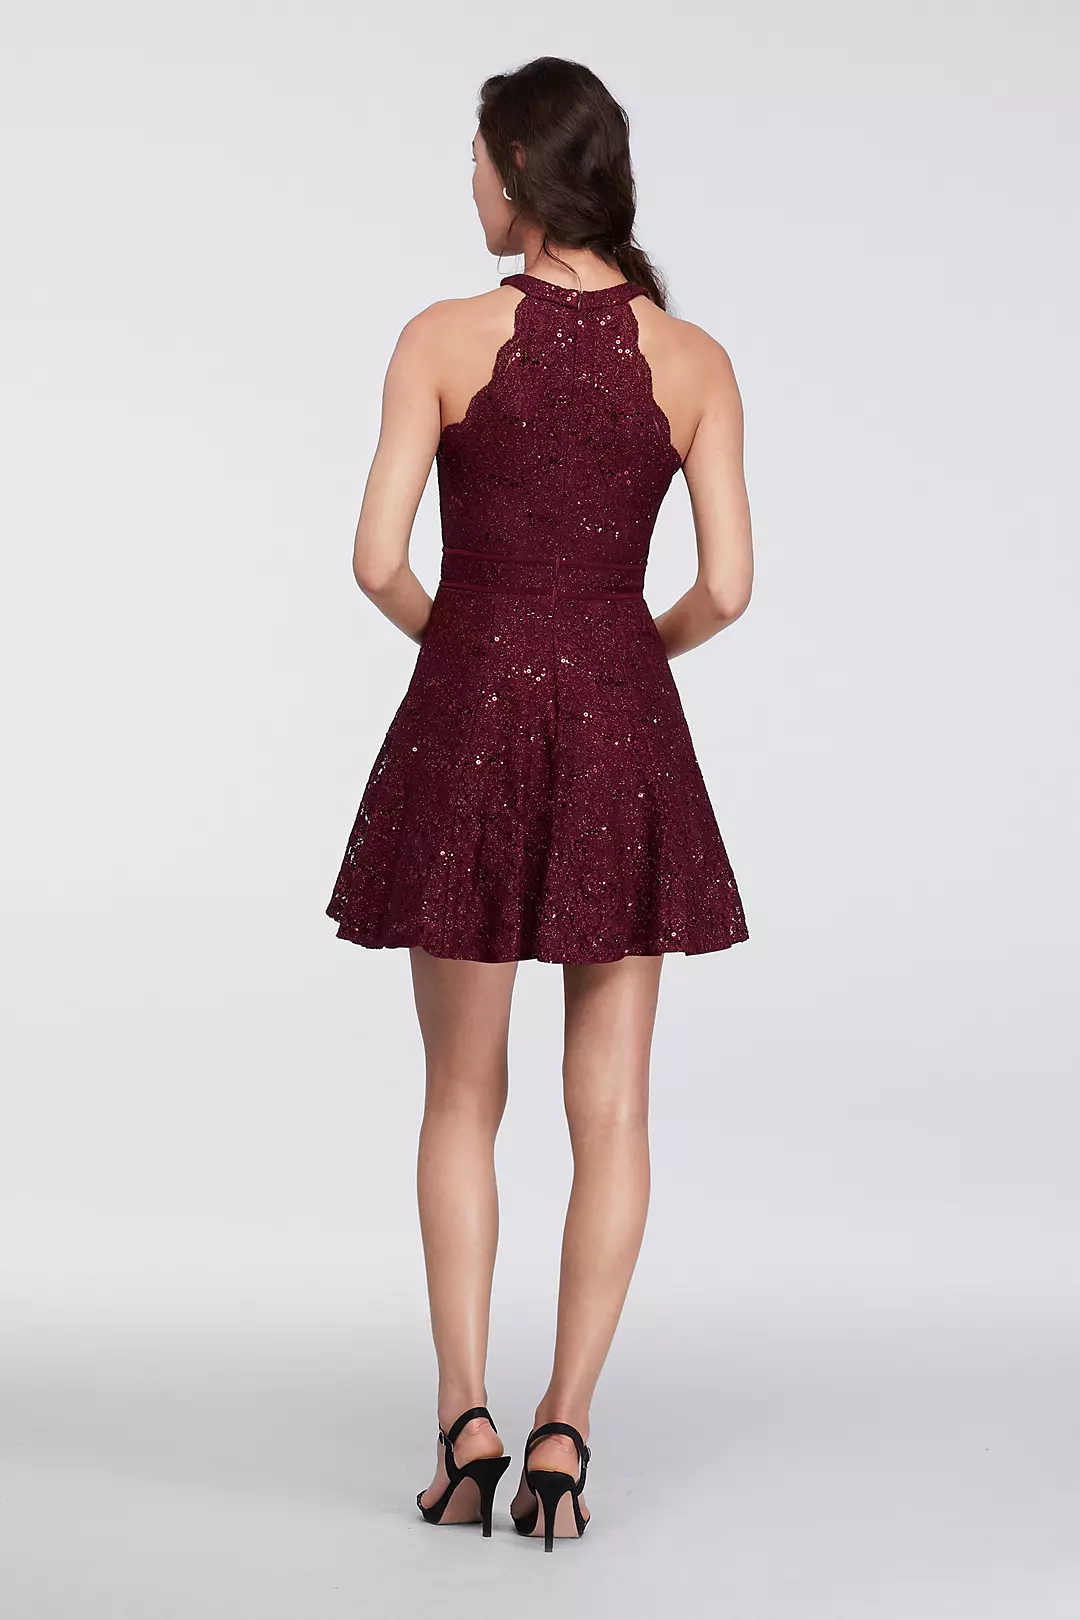 Short Halter Homecoming Dress with Illusion Inset Image 2